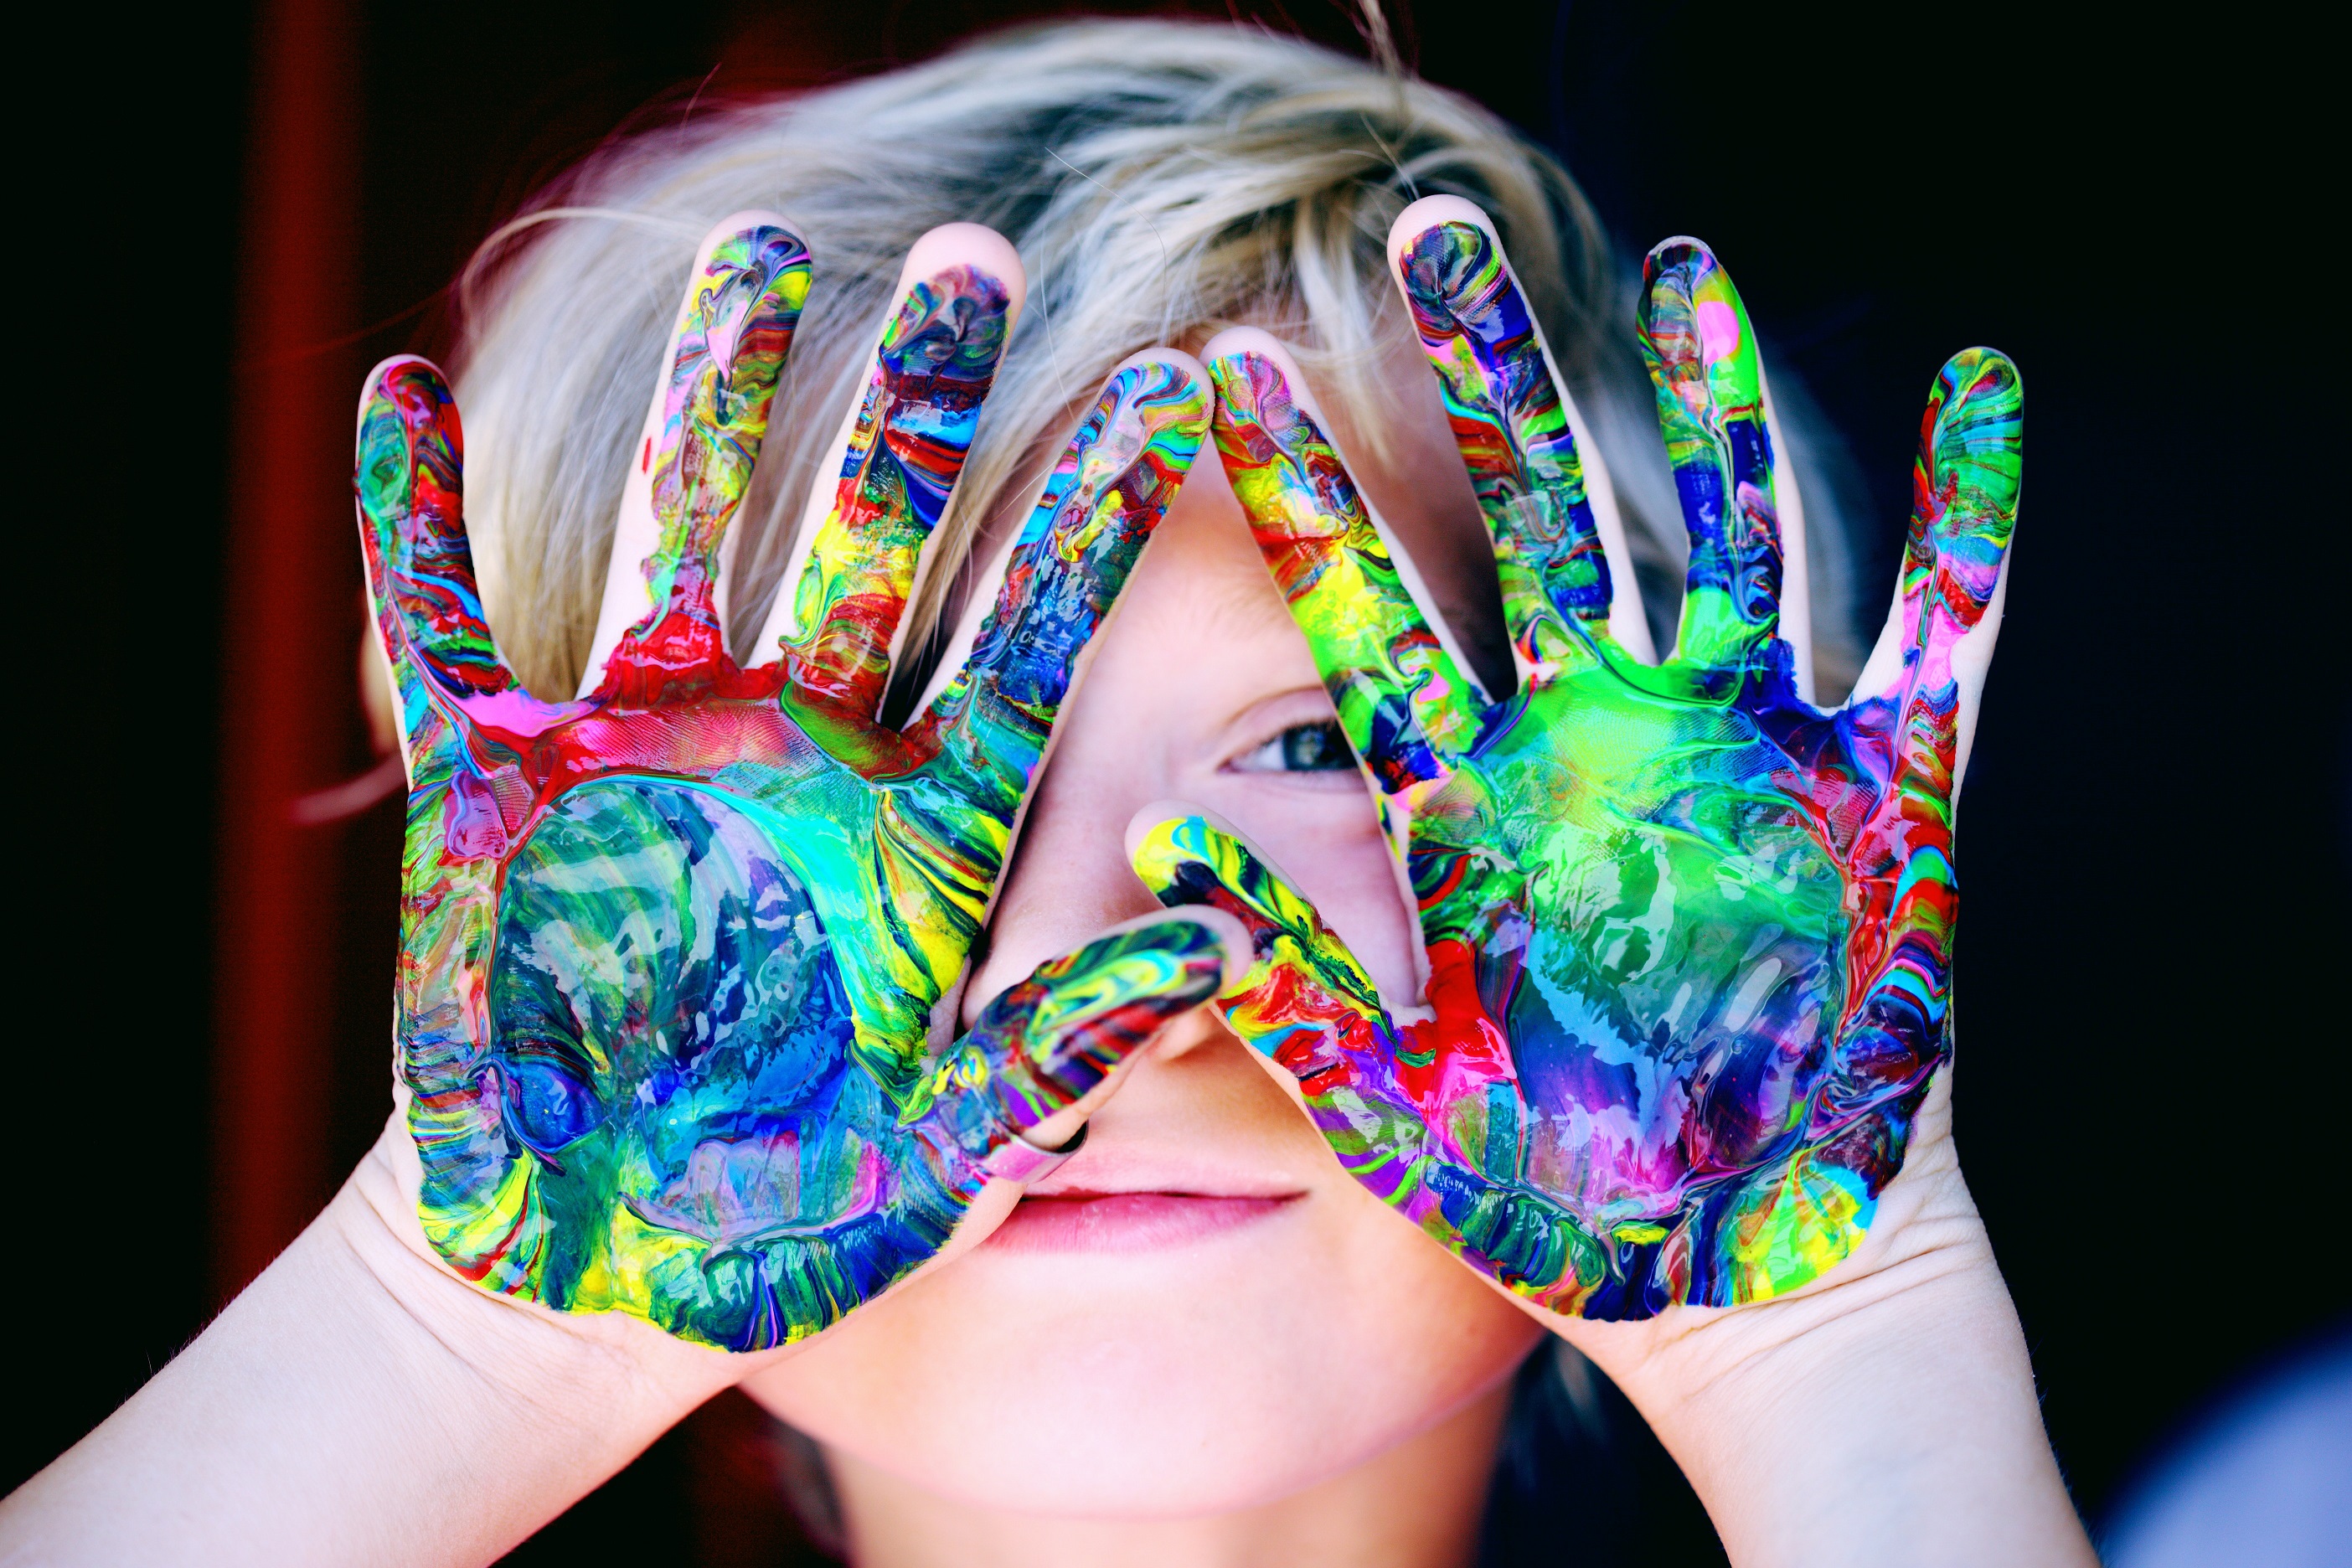 Child Holding Paint-Filled Hands Up to Face